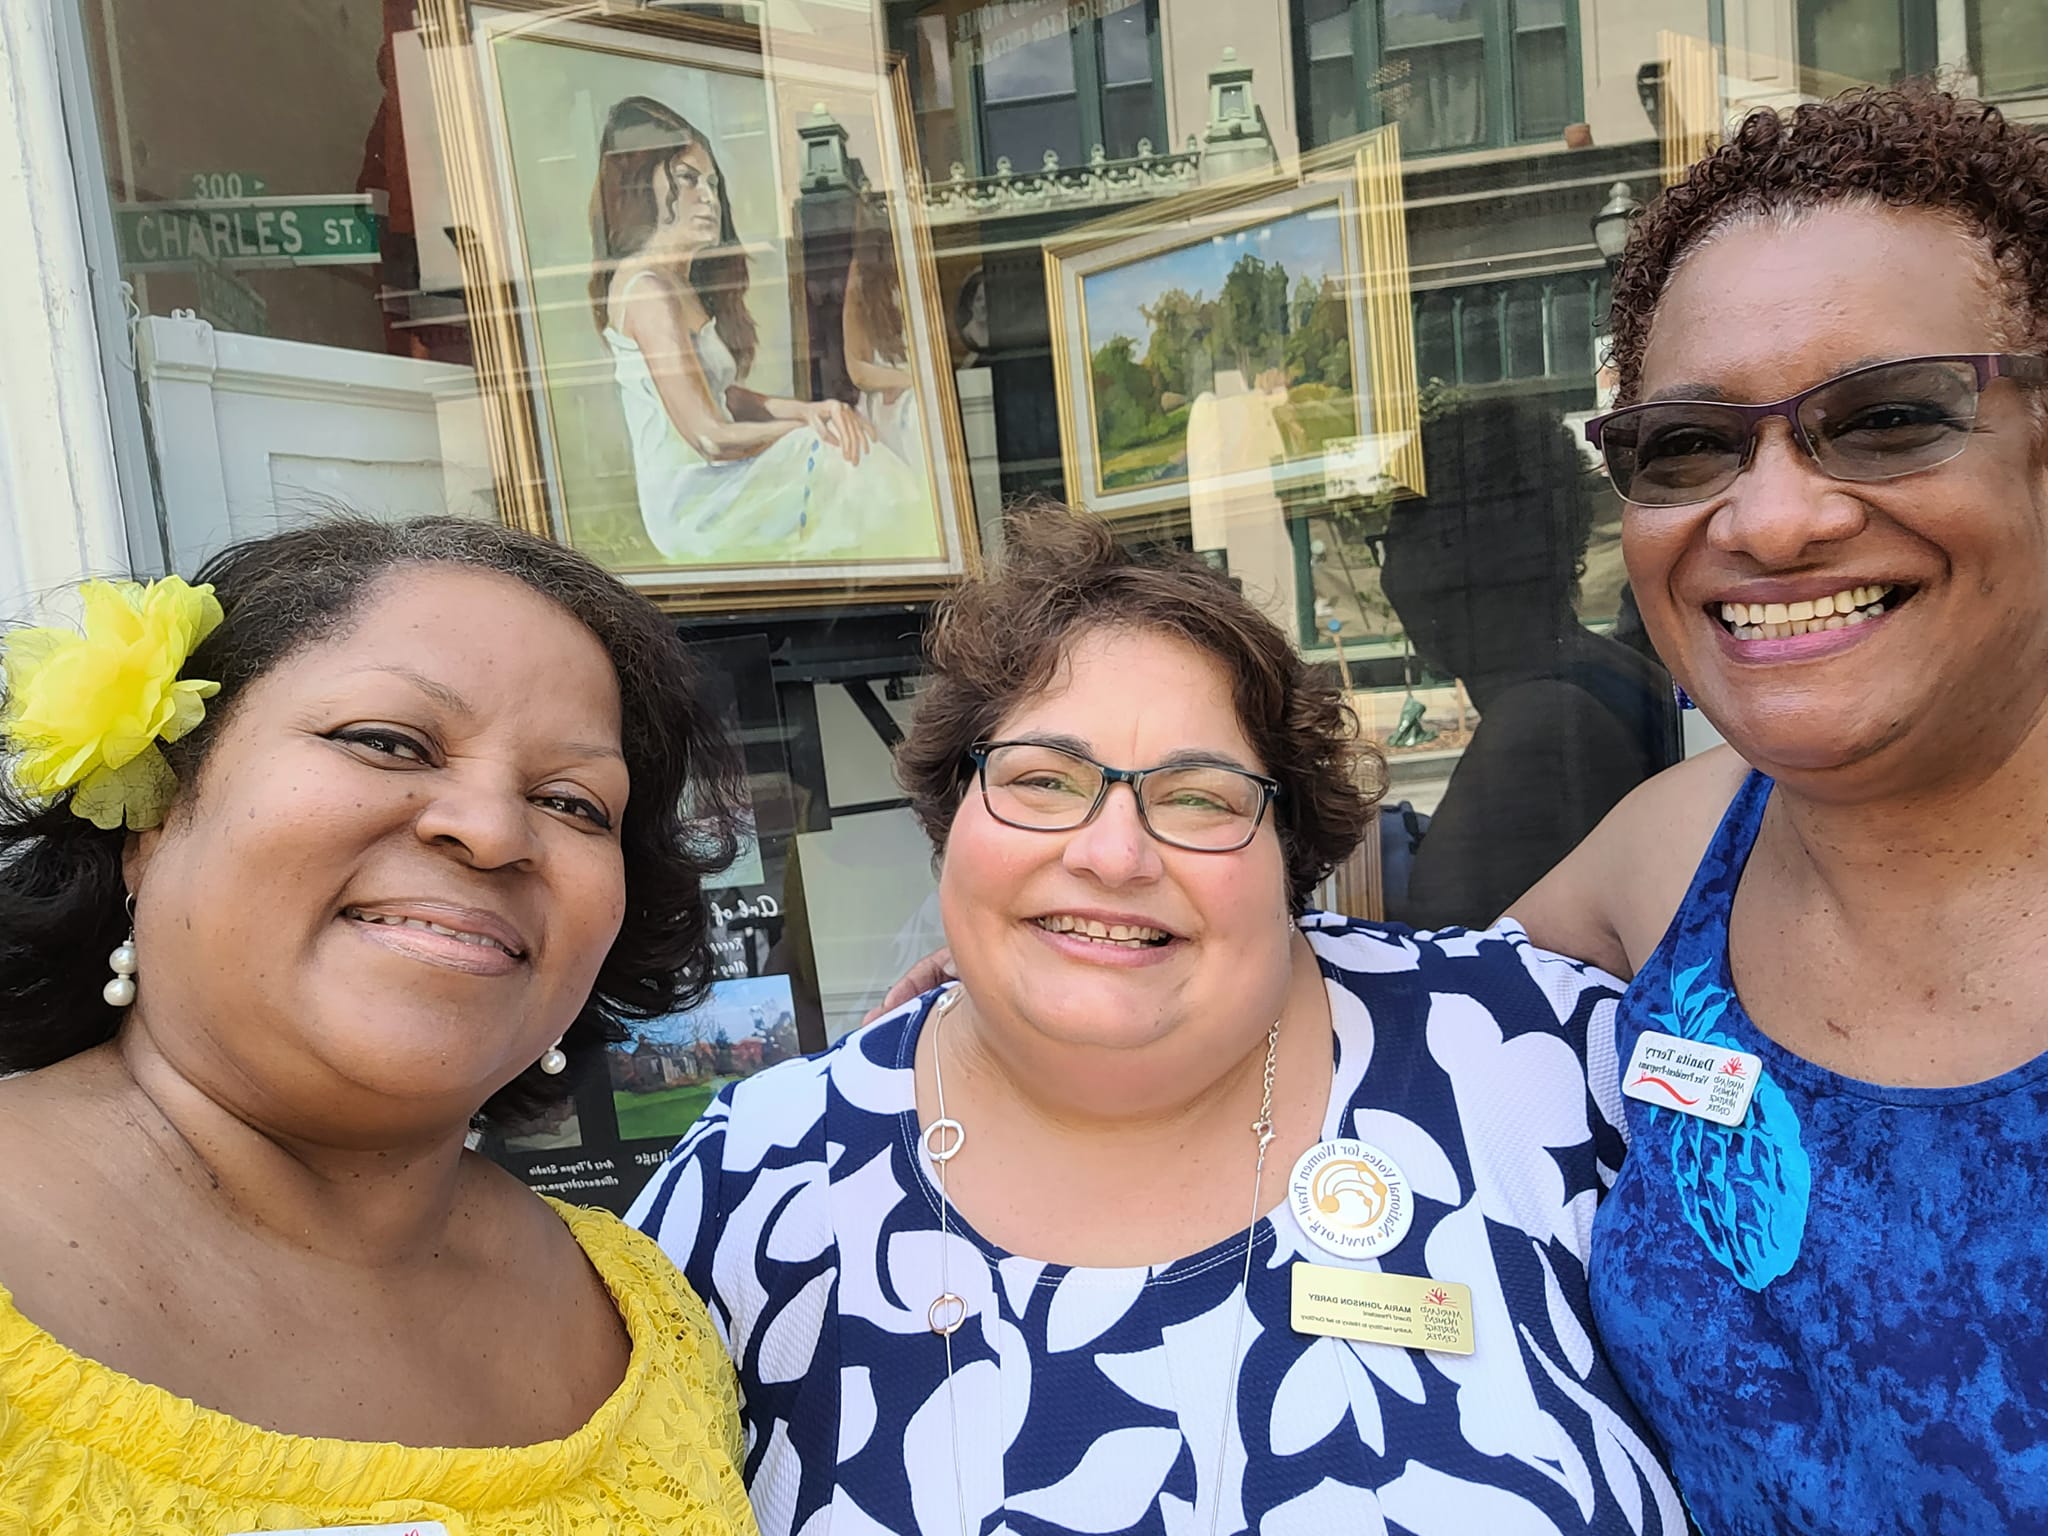 Close up of three women smiling in front of a display window containing artist paintings.